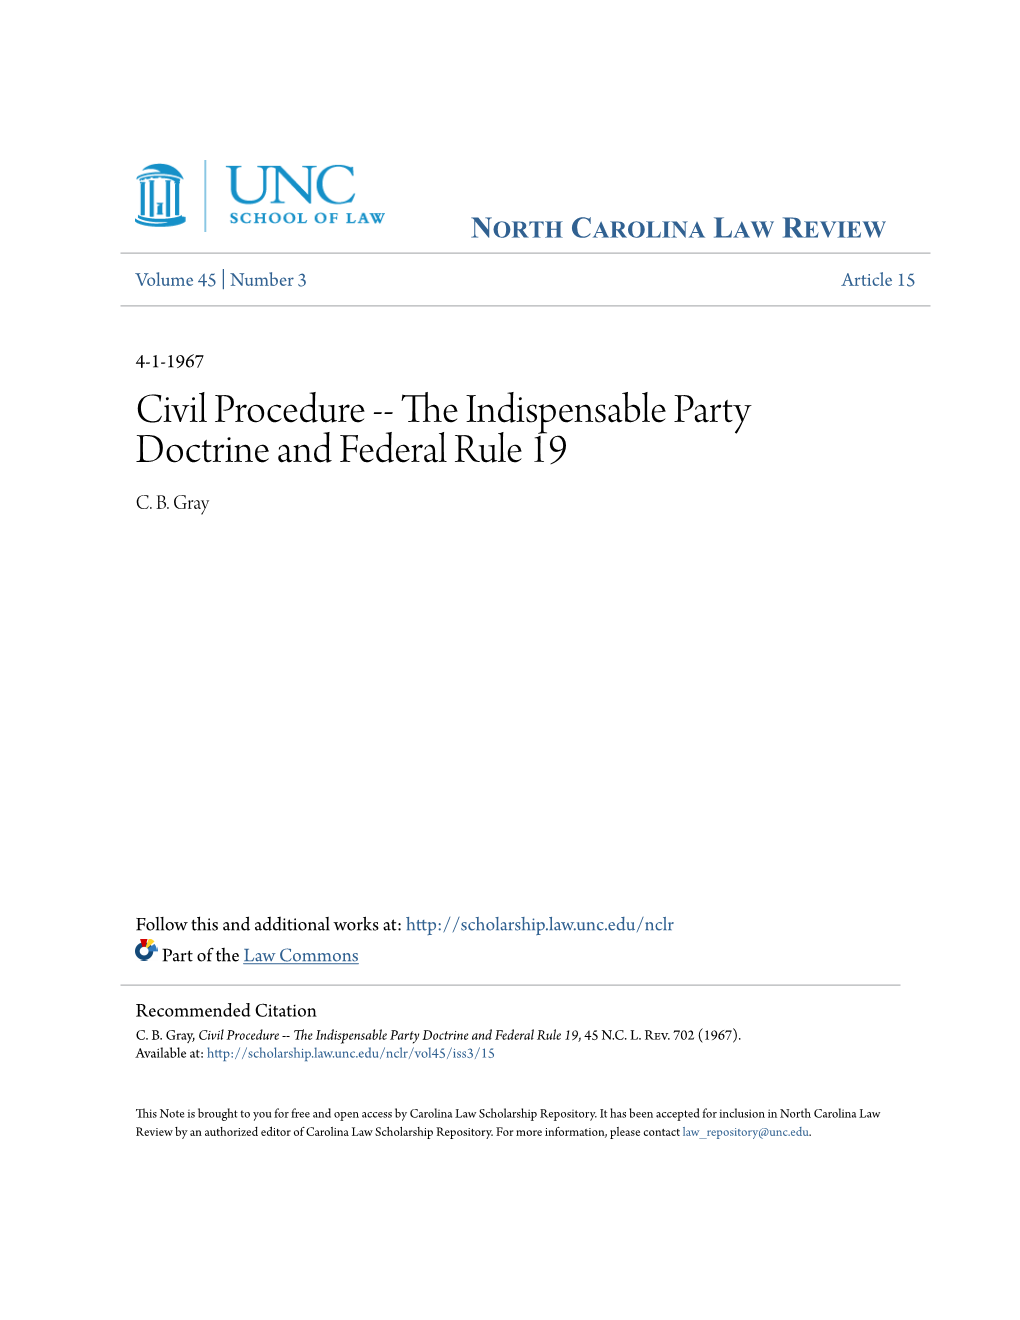 Civil Procedure -- the Indispensable Party Doctrine and Federal Rule 19, 45 N.C